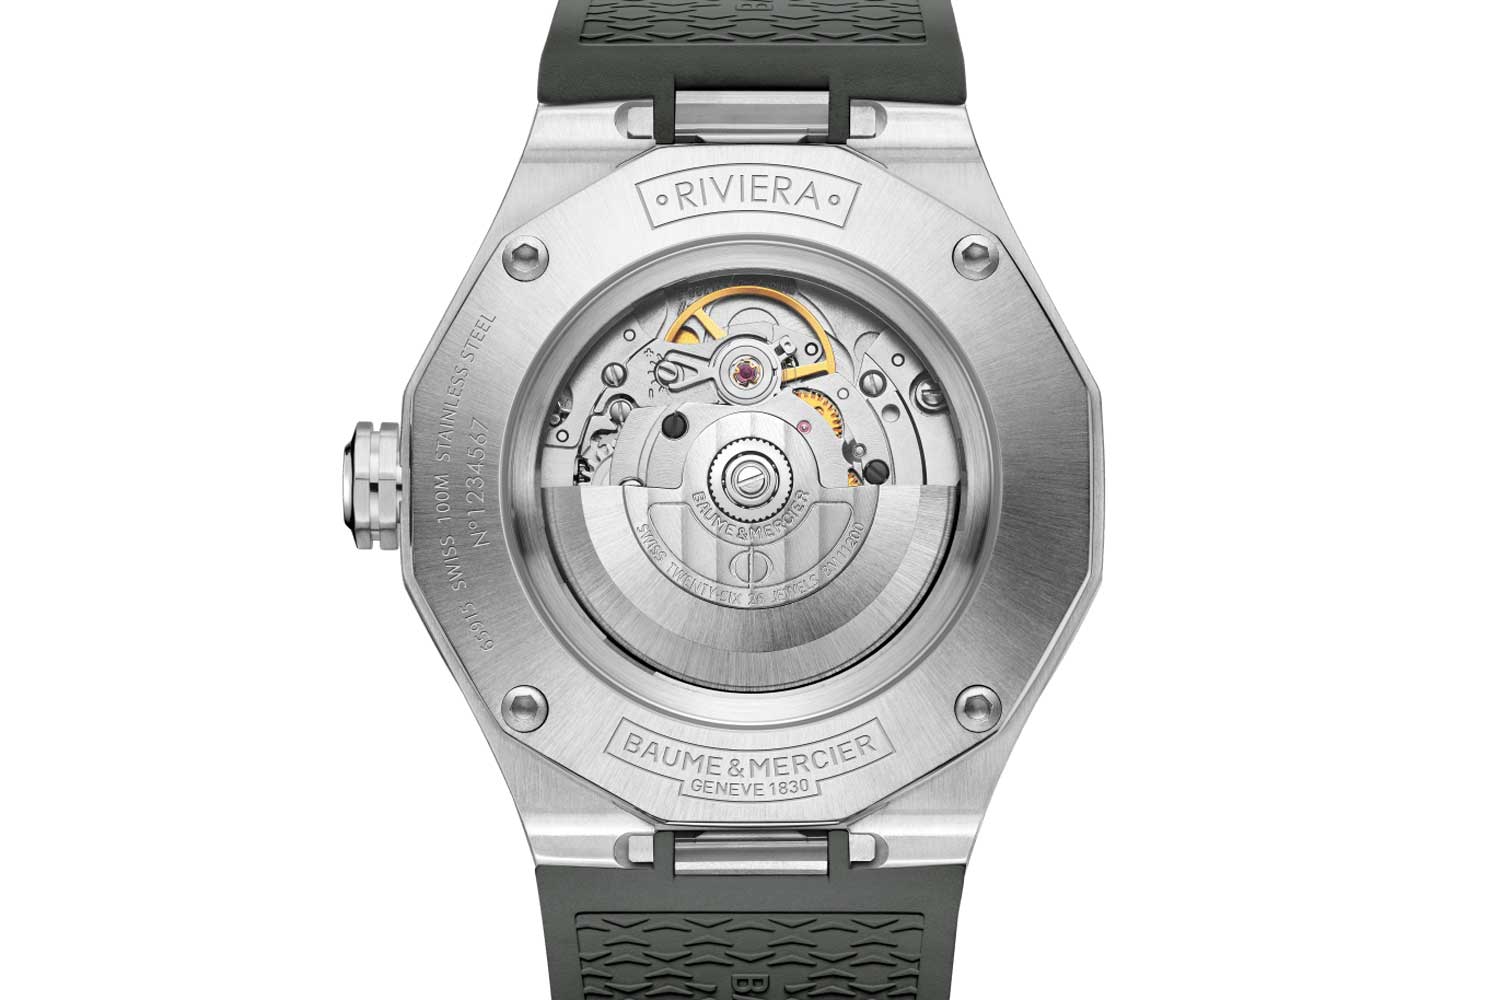 Ref. M0A10660 with automatic movement and interchangeable grey rubber strap